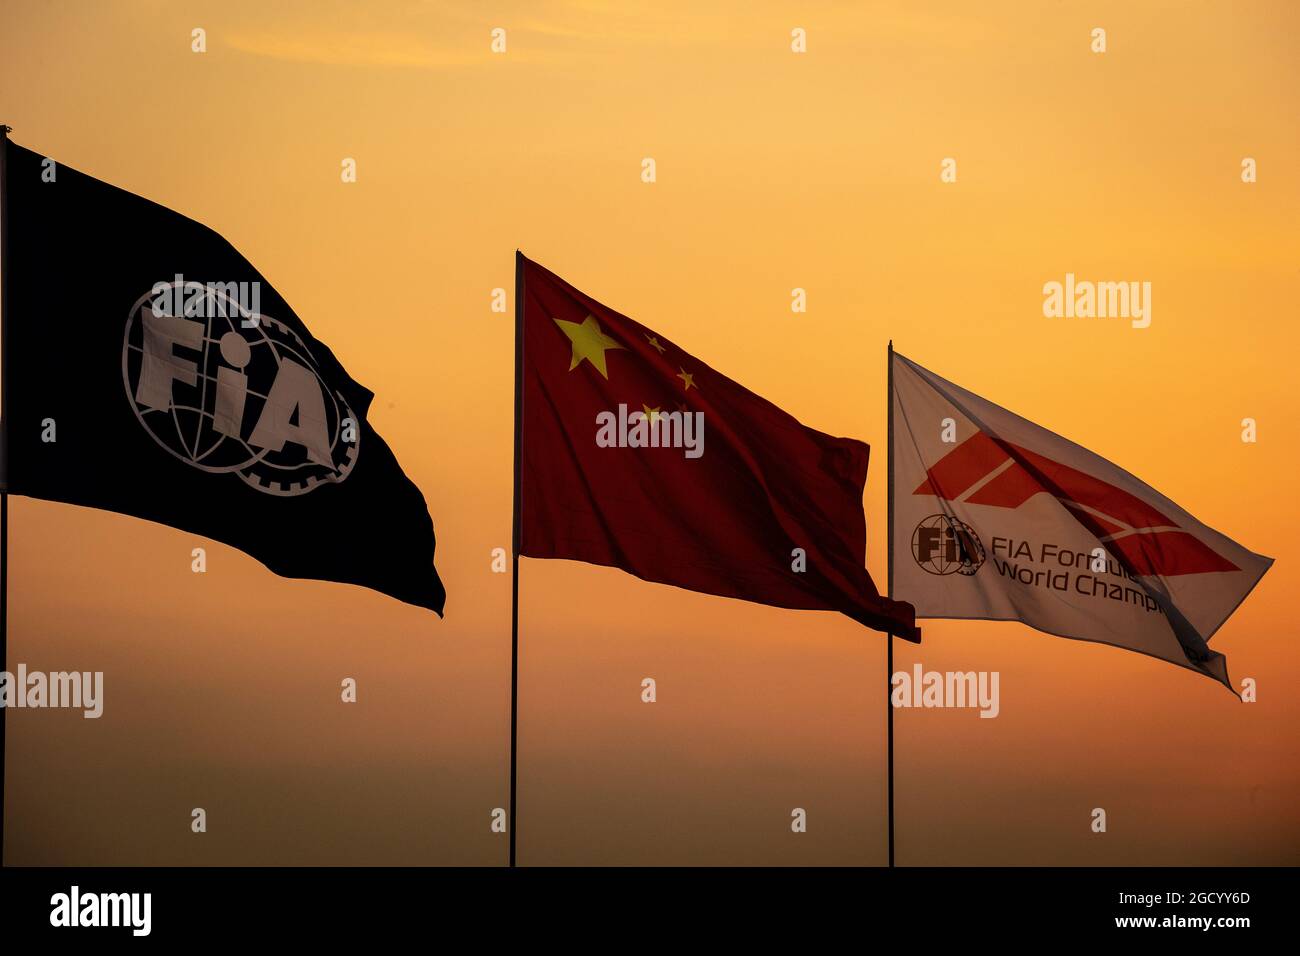 Atmosphere - flags at sunset. Chinese Grand Prix, Thursday 11th April 2019. Shanghai, China. Stock Photo